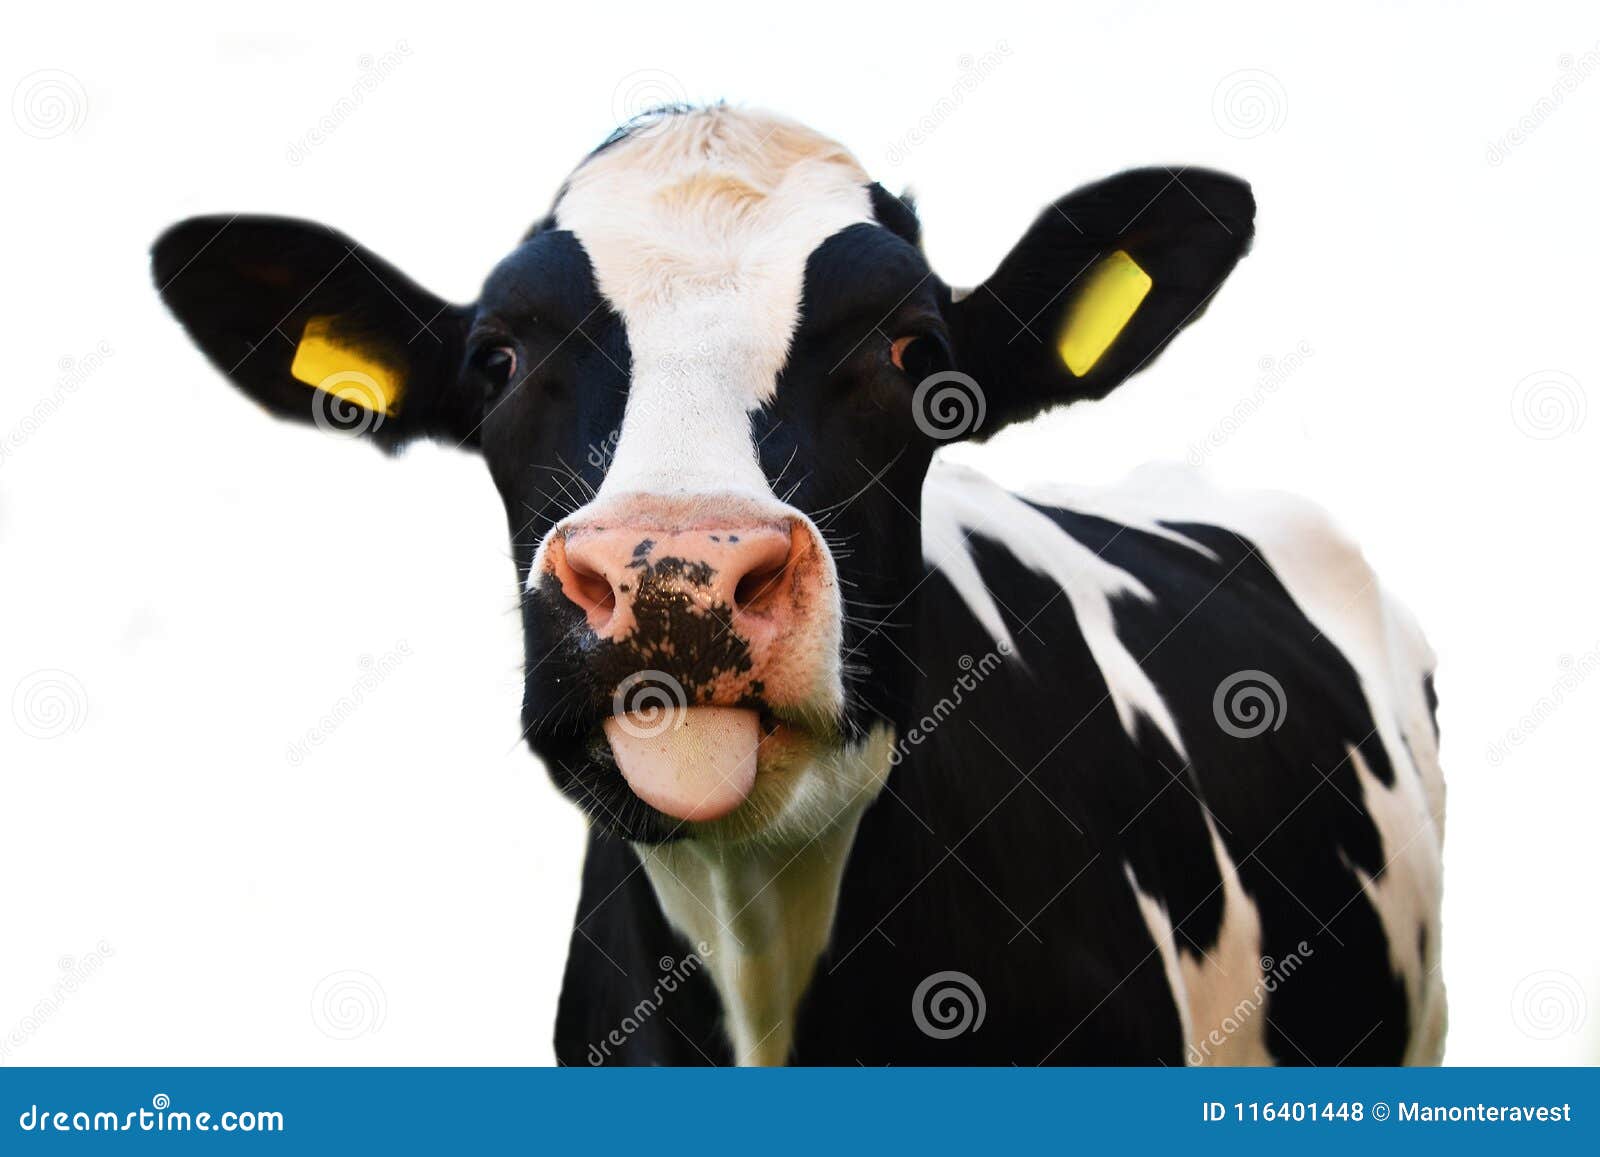  cow with ear tags sticking out of his tongue